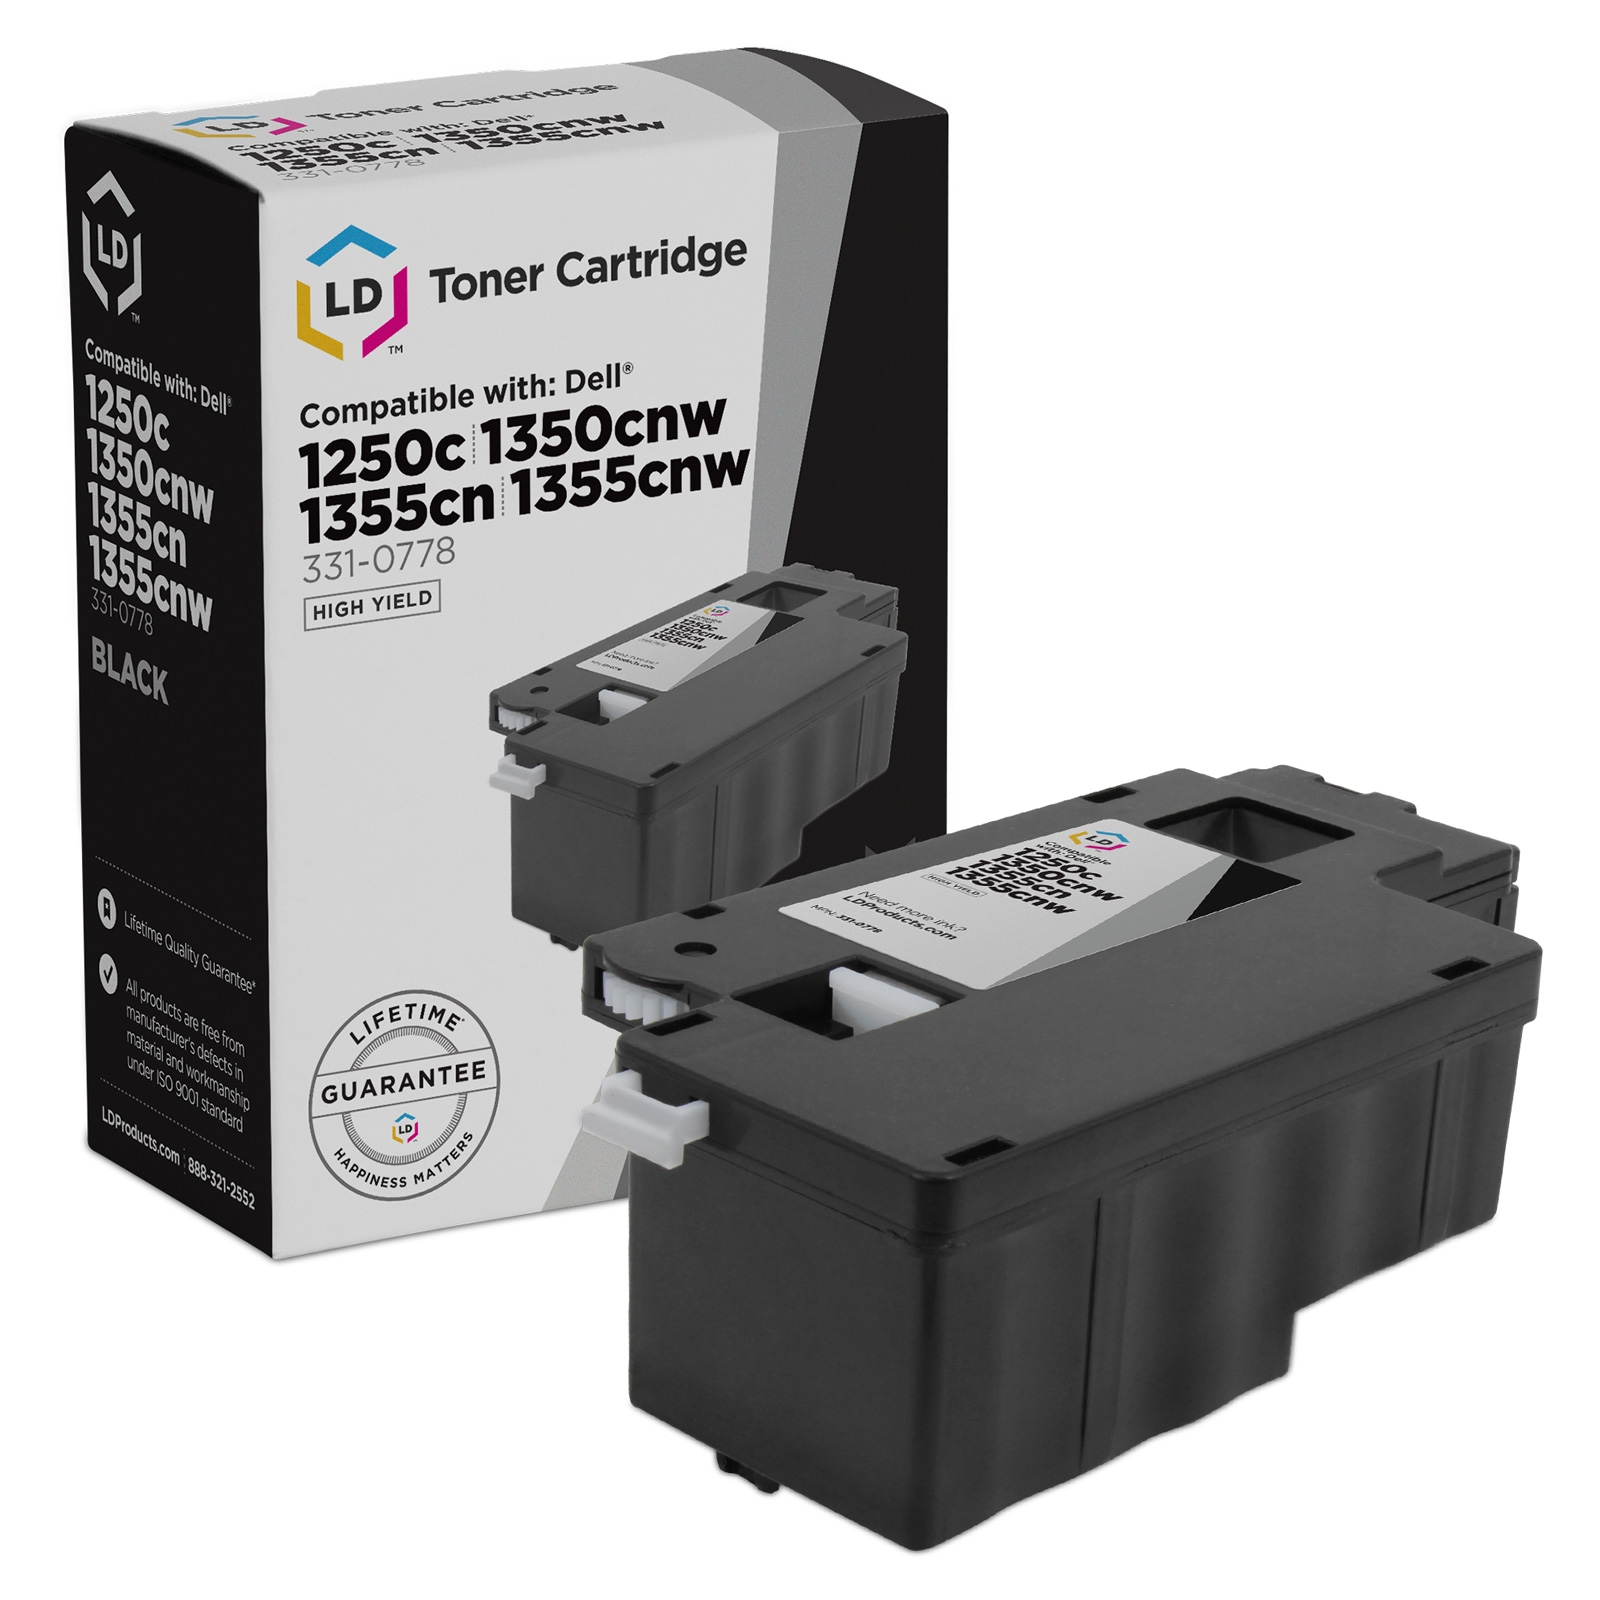 Photos - Ink & Toner Cartridge Dell 810WH Laser - Compatible HY Black 331-0778 